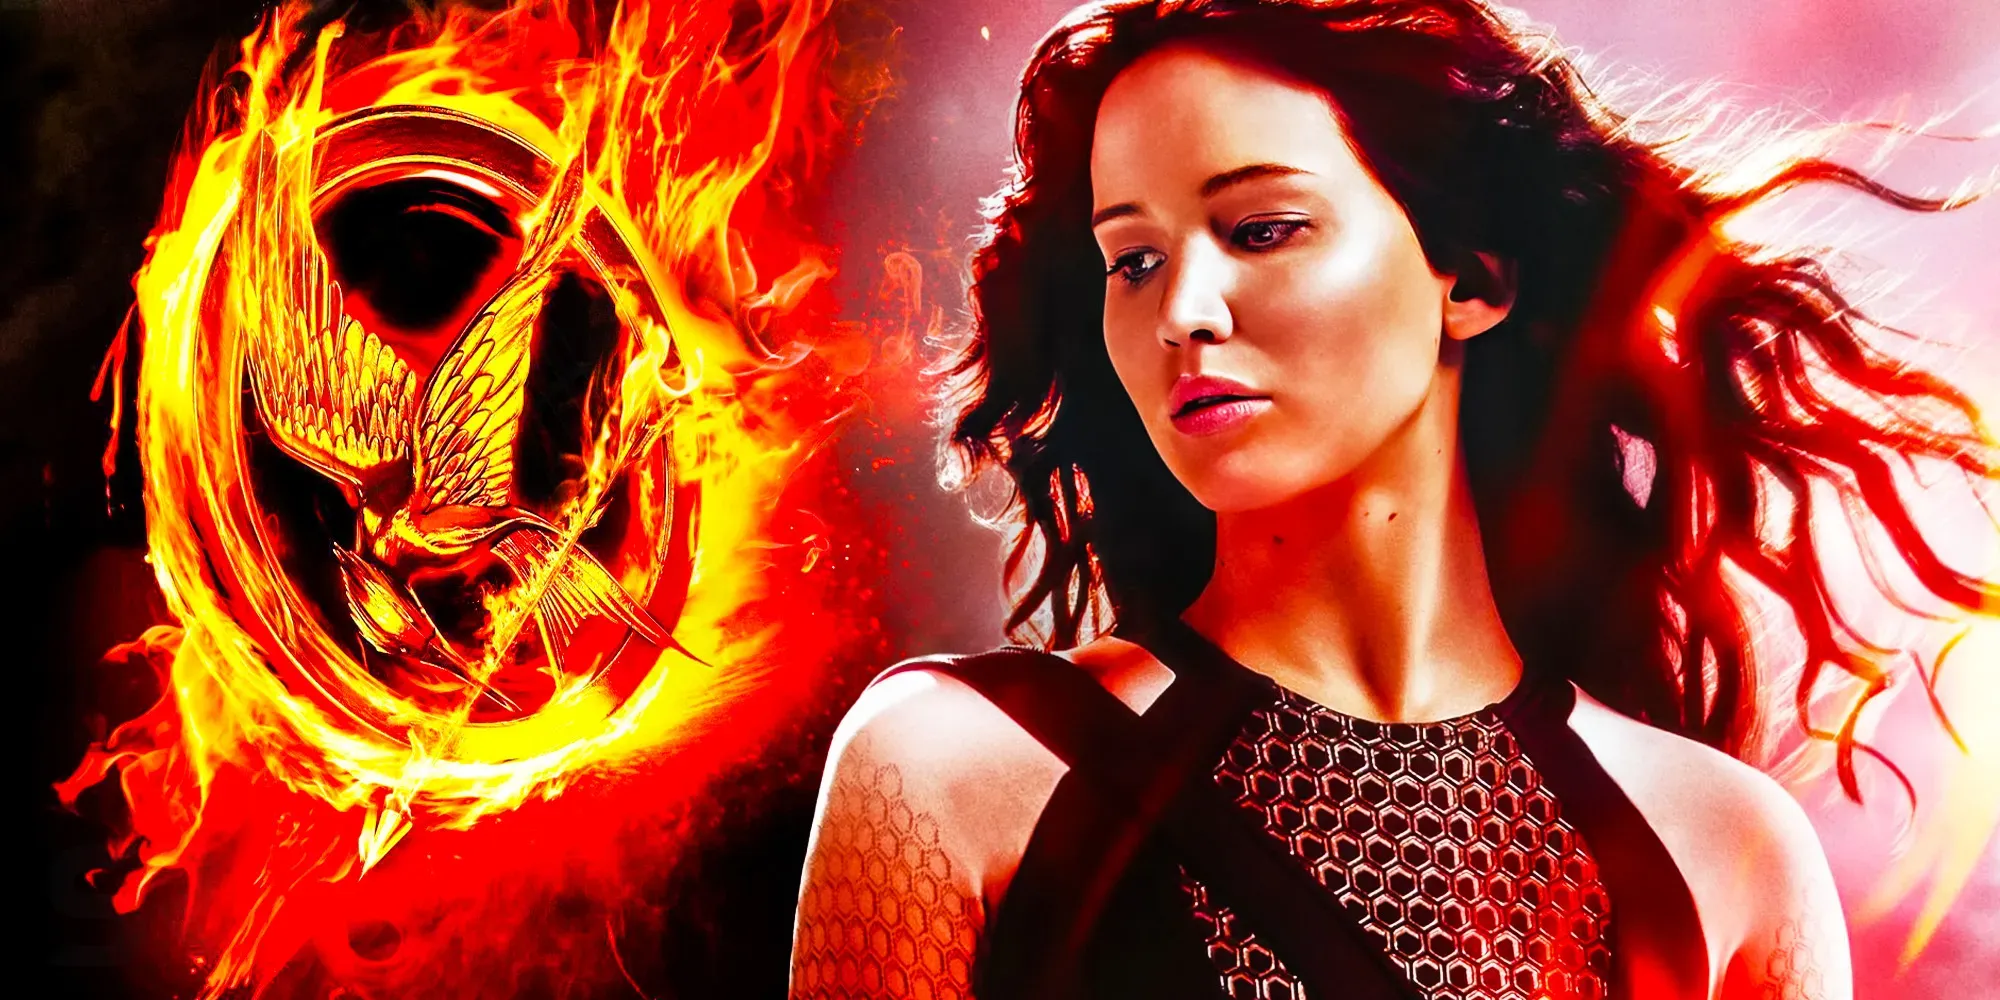 Jennifer Lawrence as Katniss in a poster for Catching Fire